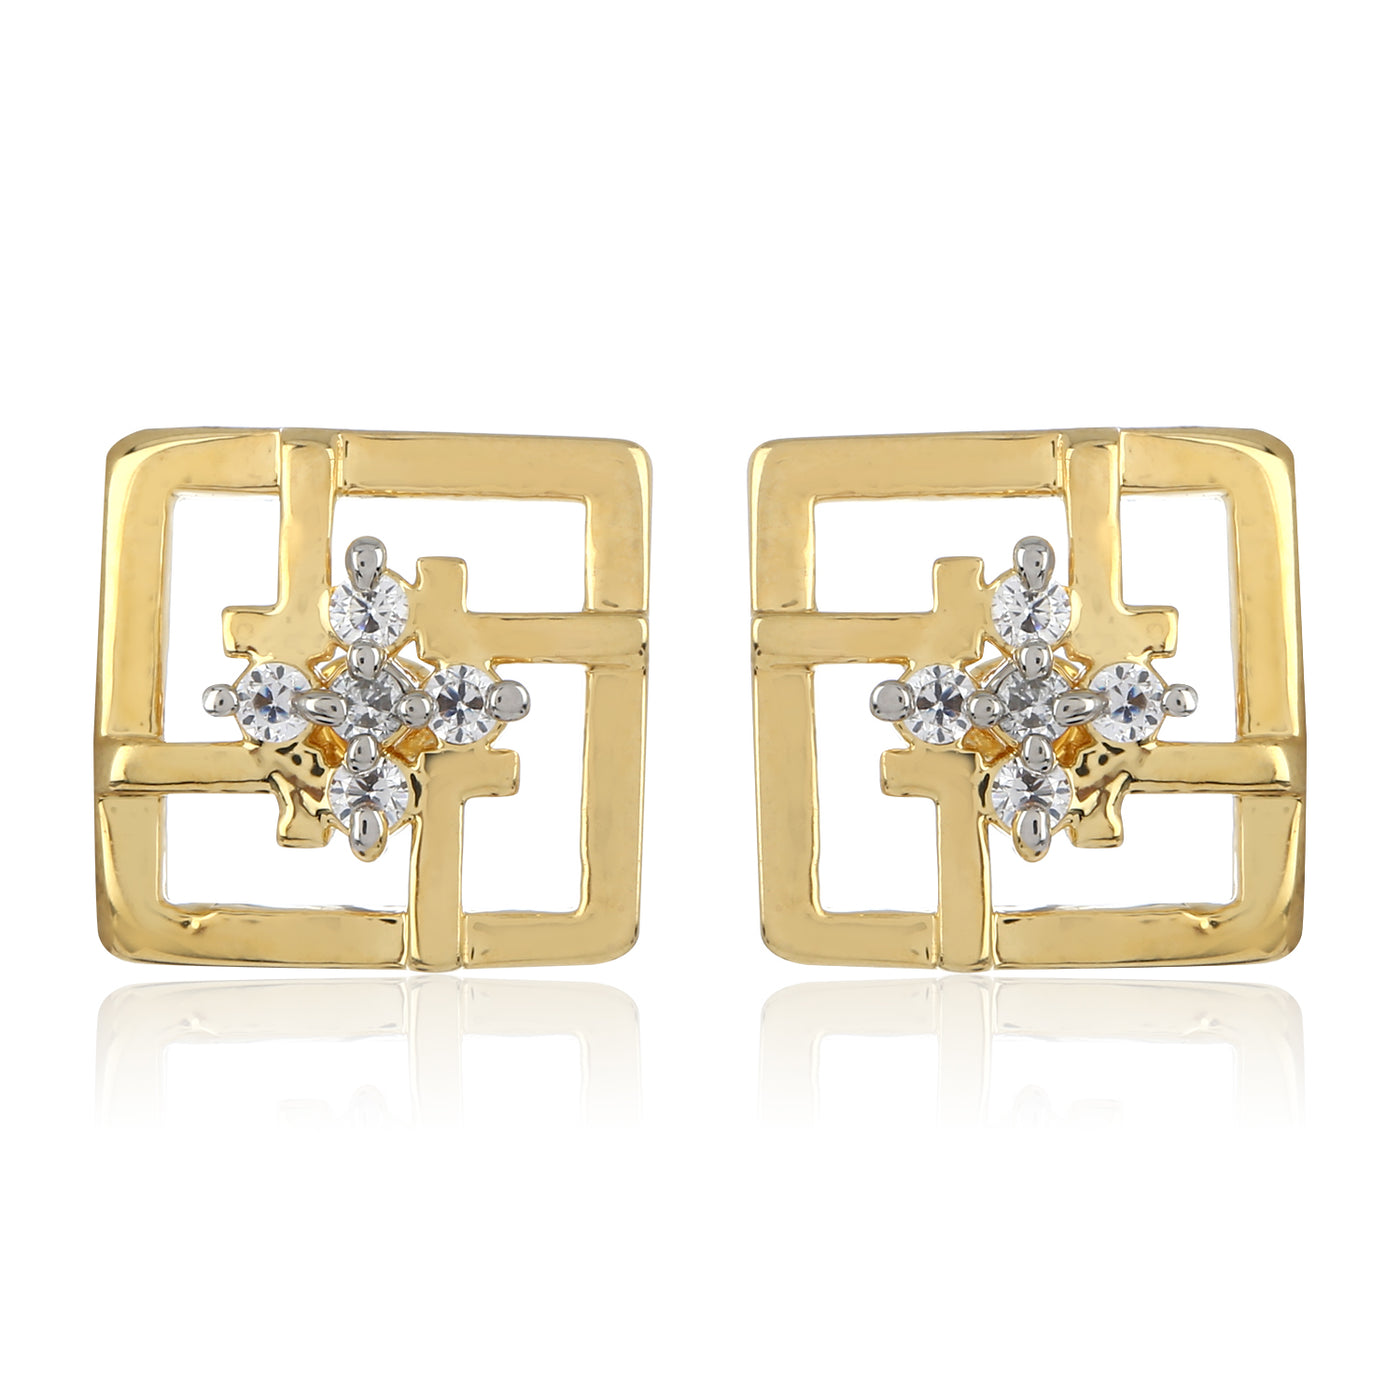 Estele Gold Plated Square Shaped Stud With AD Stone earrings for Women